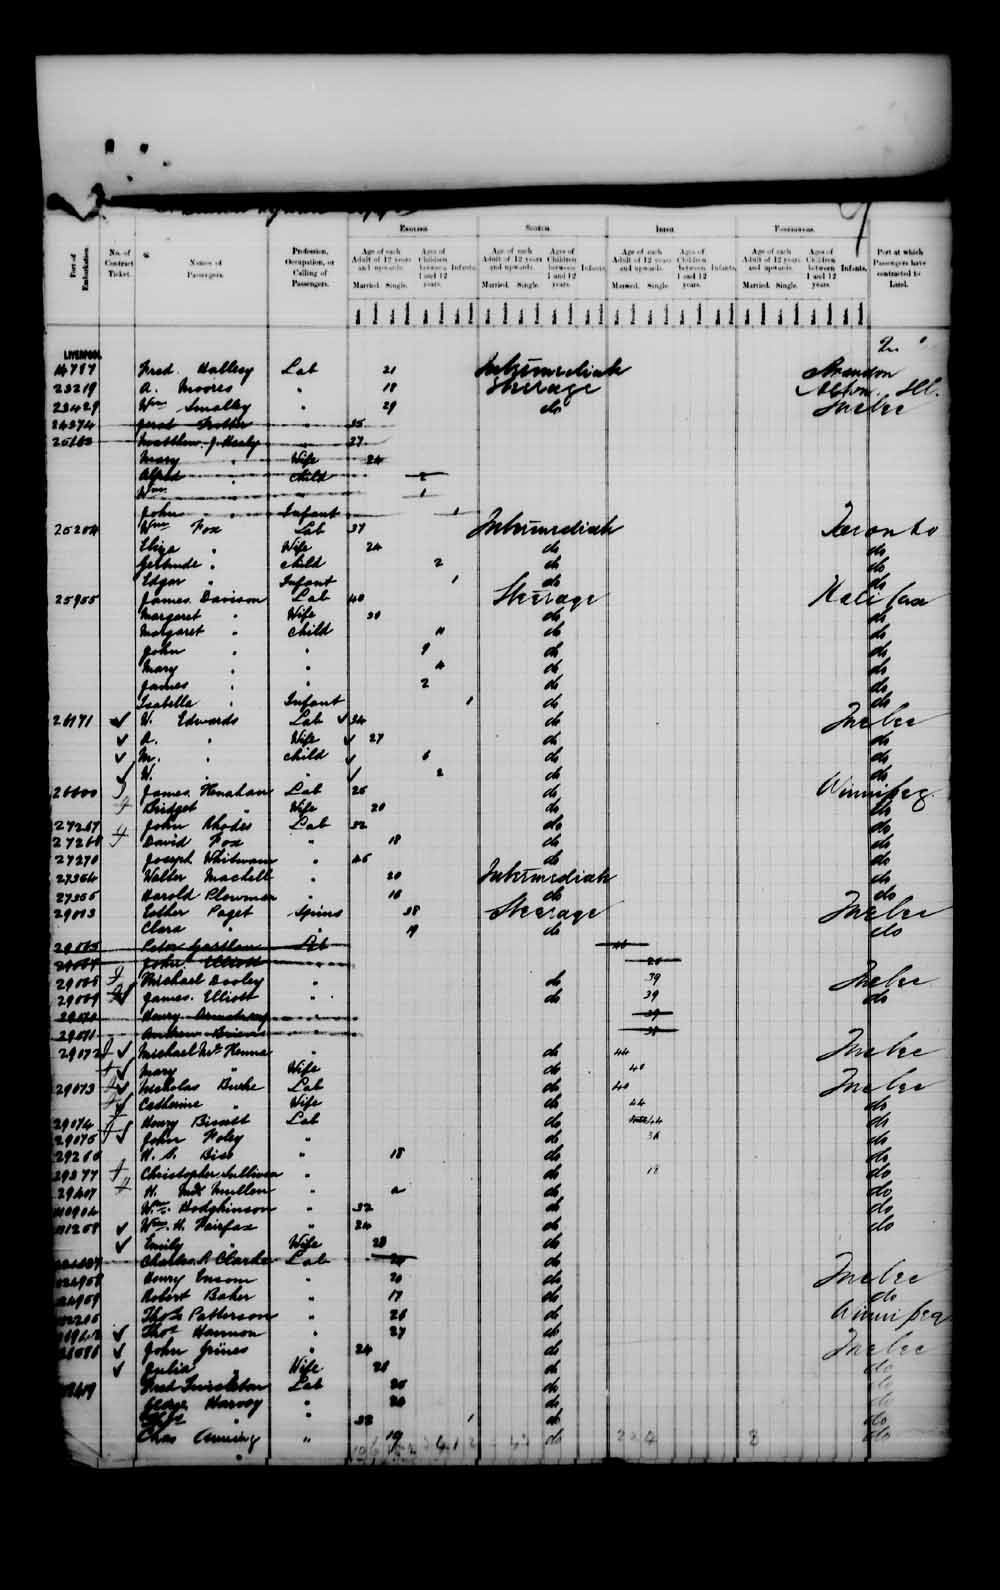 Digitized page of Passenger Lists for Image No.: e003542776